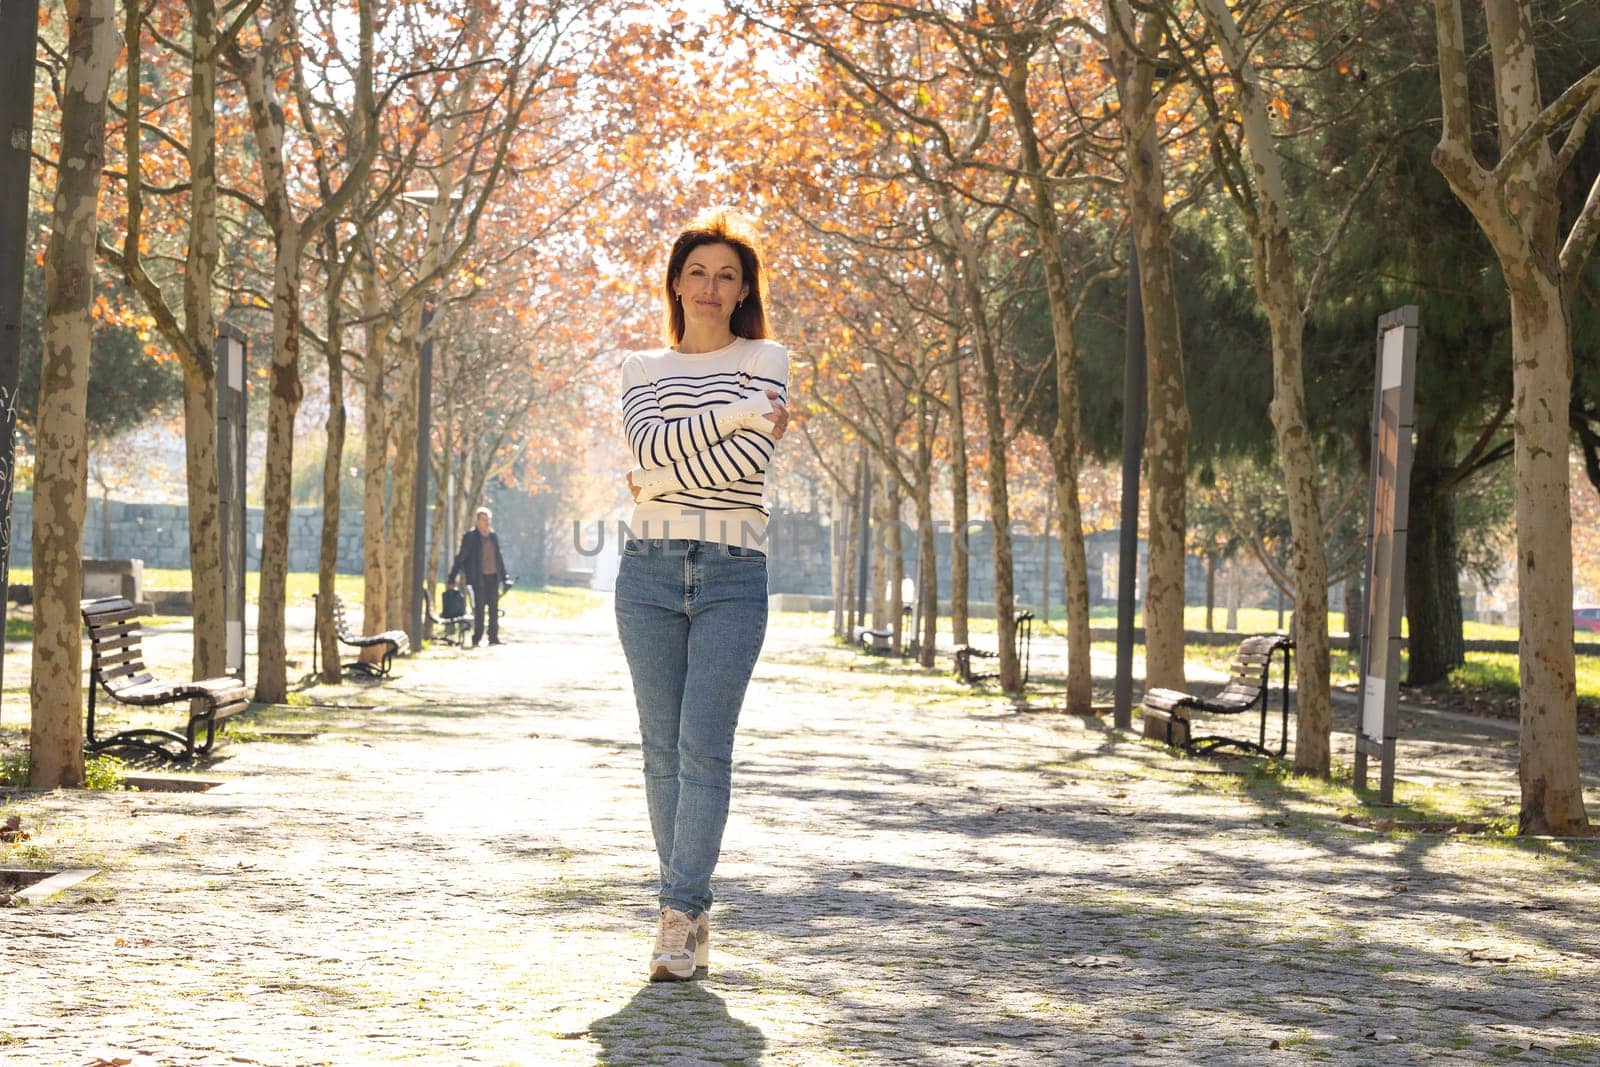 A woman is walking down a path in a park. She is wearing a white shirt and blue jeans